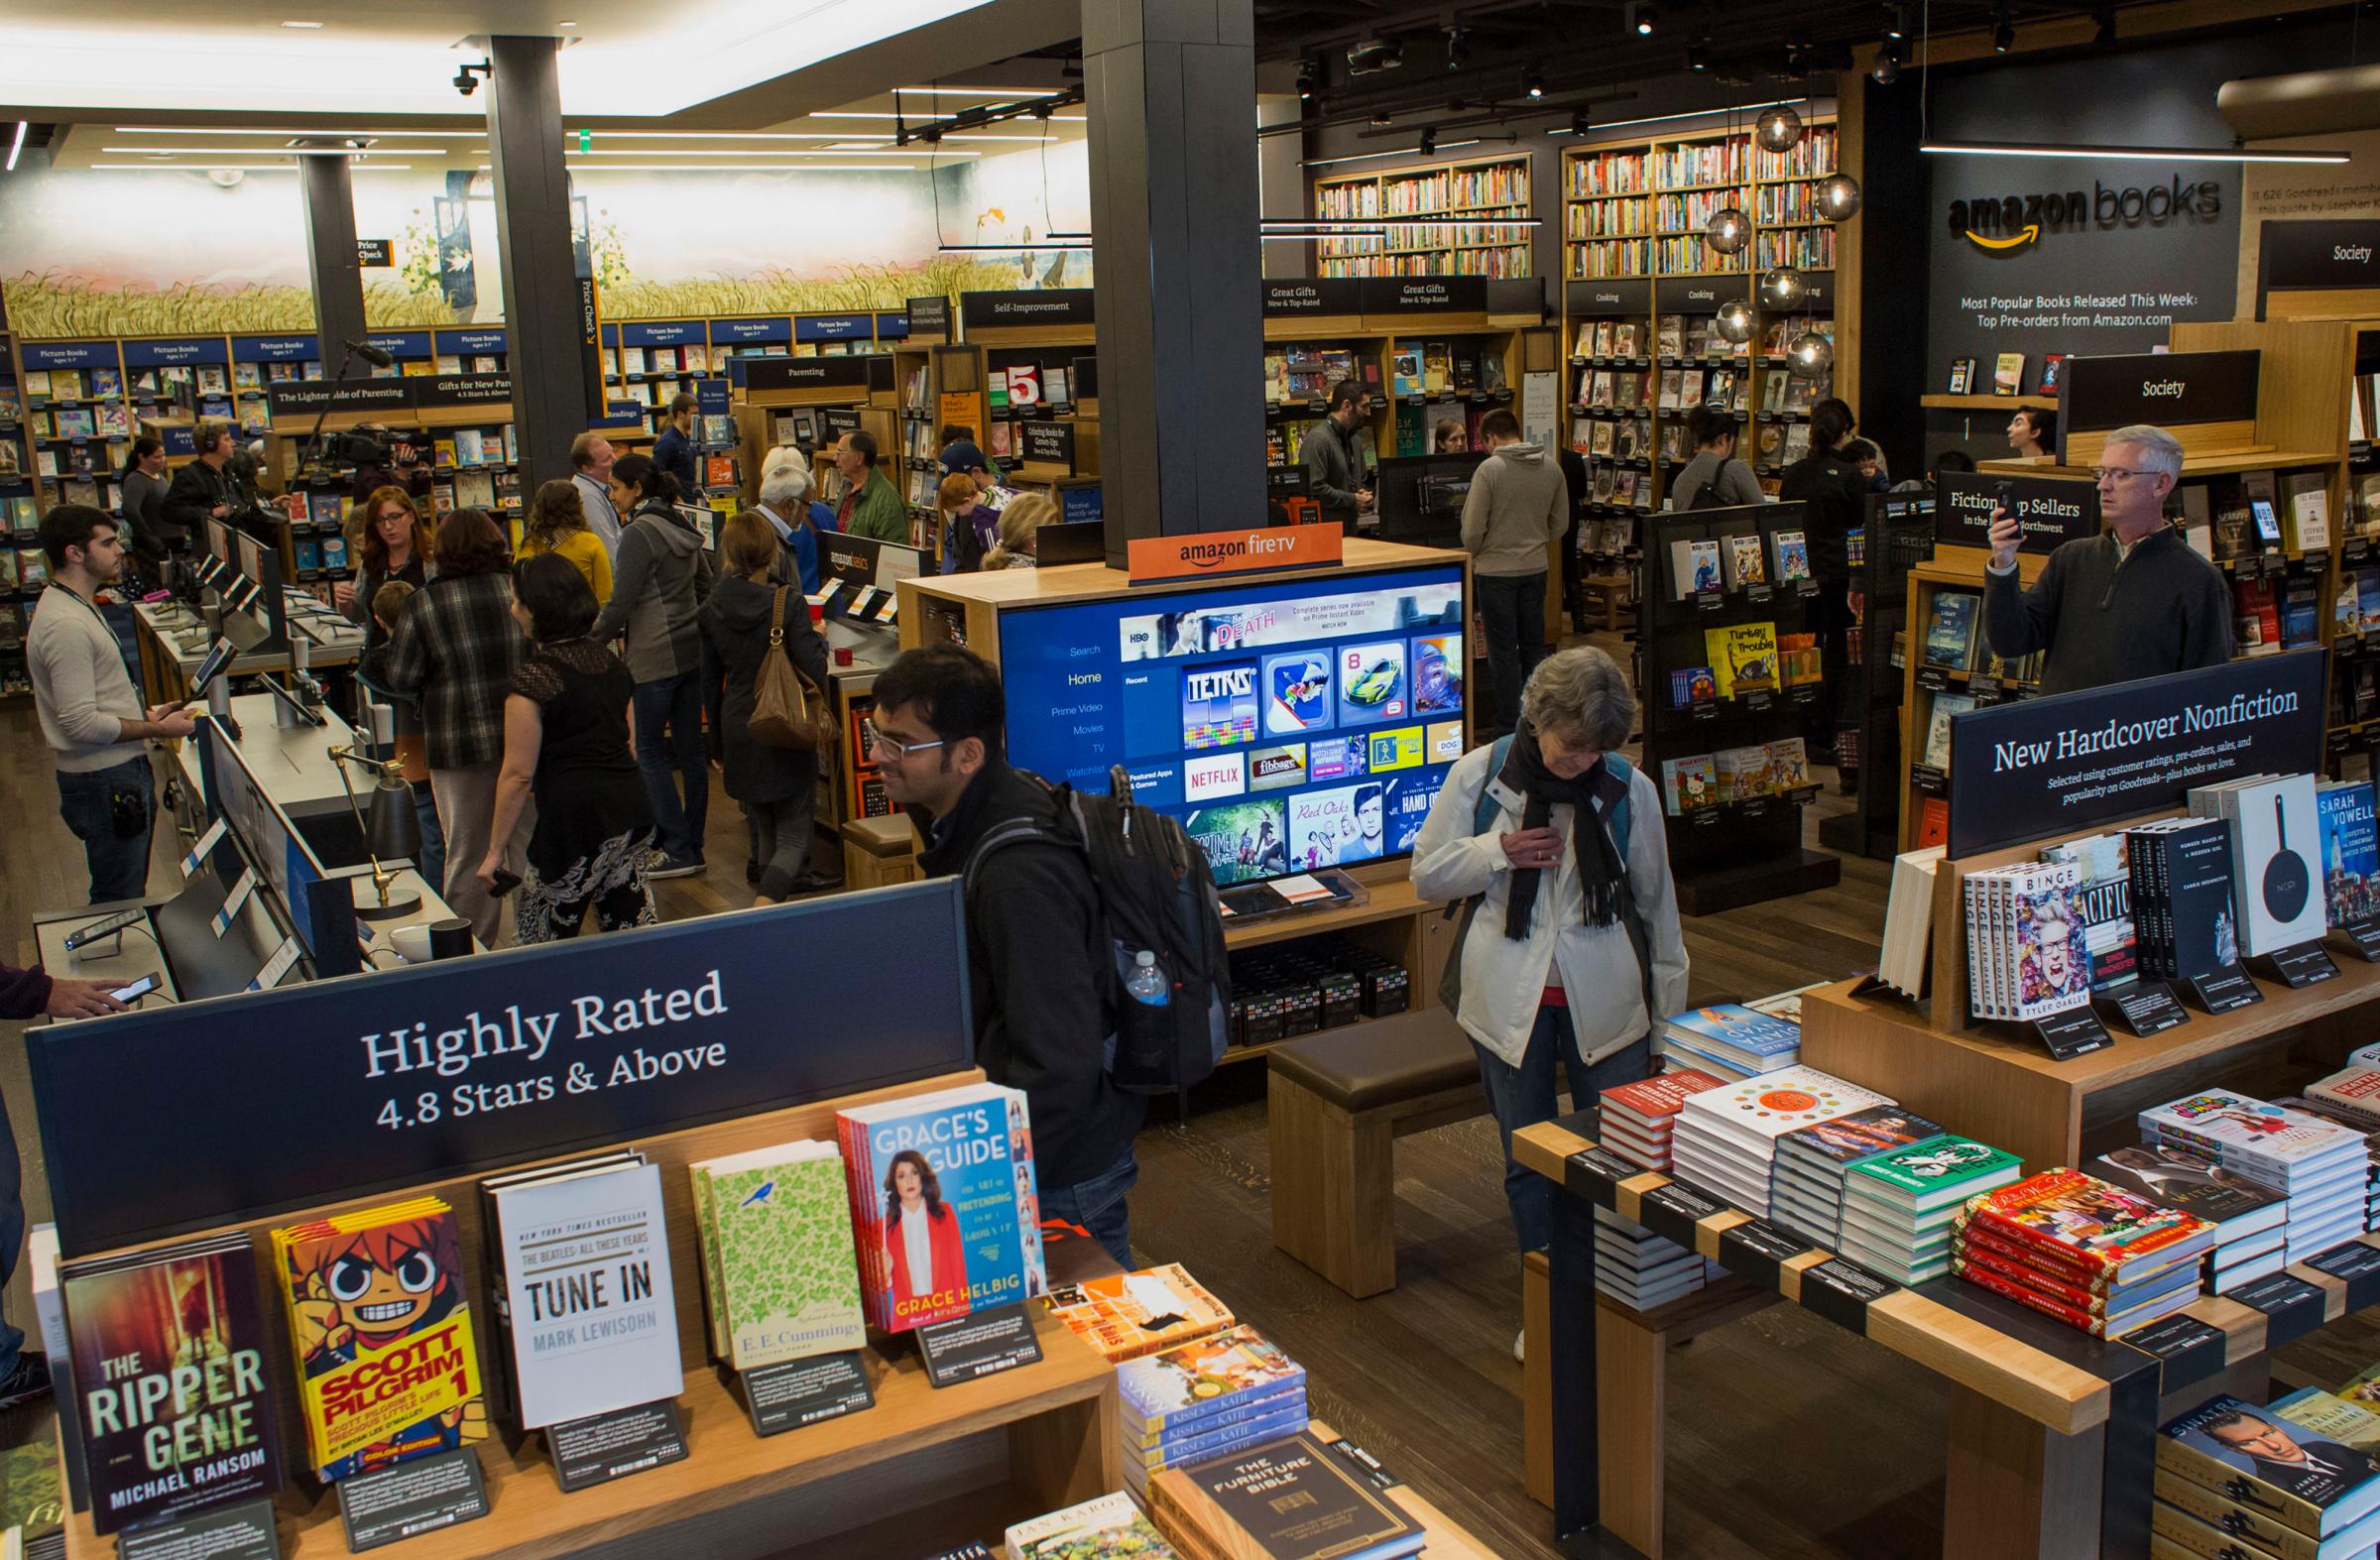 Customers shop inside Amazon Books in Seattle, Washington, on Tuesday, Nov. 3, 2015. The online retailer Amazon.com Inc. opened its first brick-and-mortar location in Seattle's upscale University Village mall. Photographer: Jasper Juinen/Bloomberg